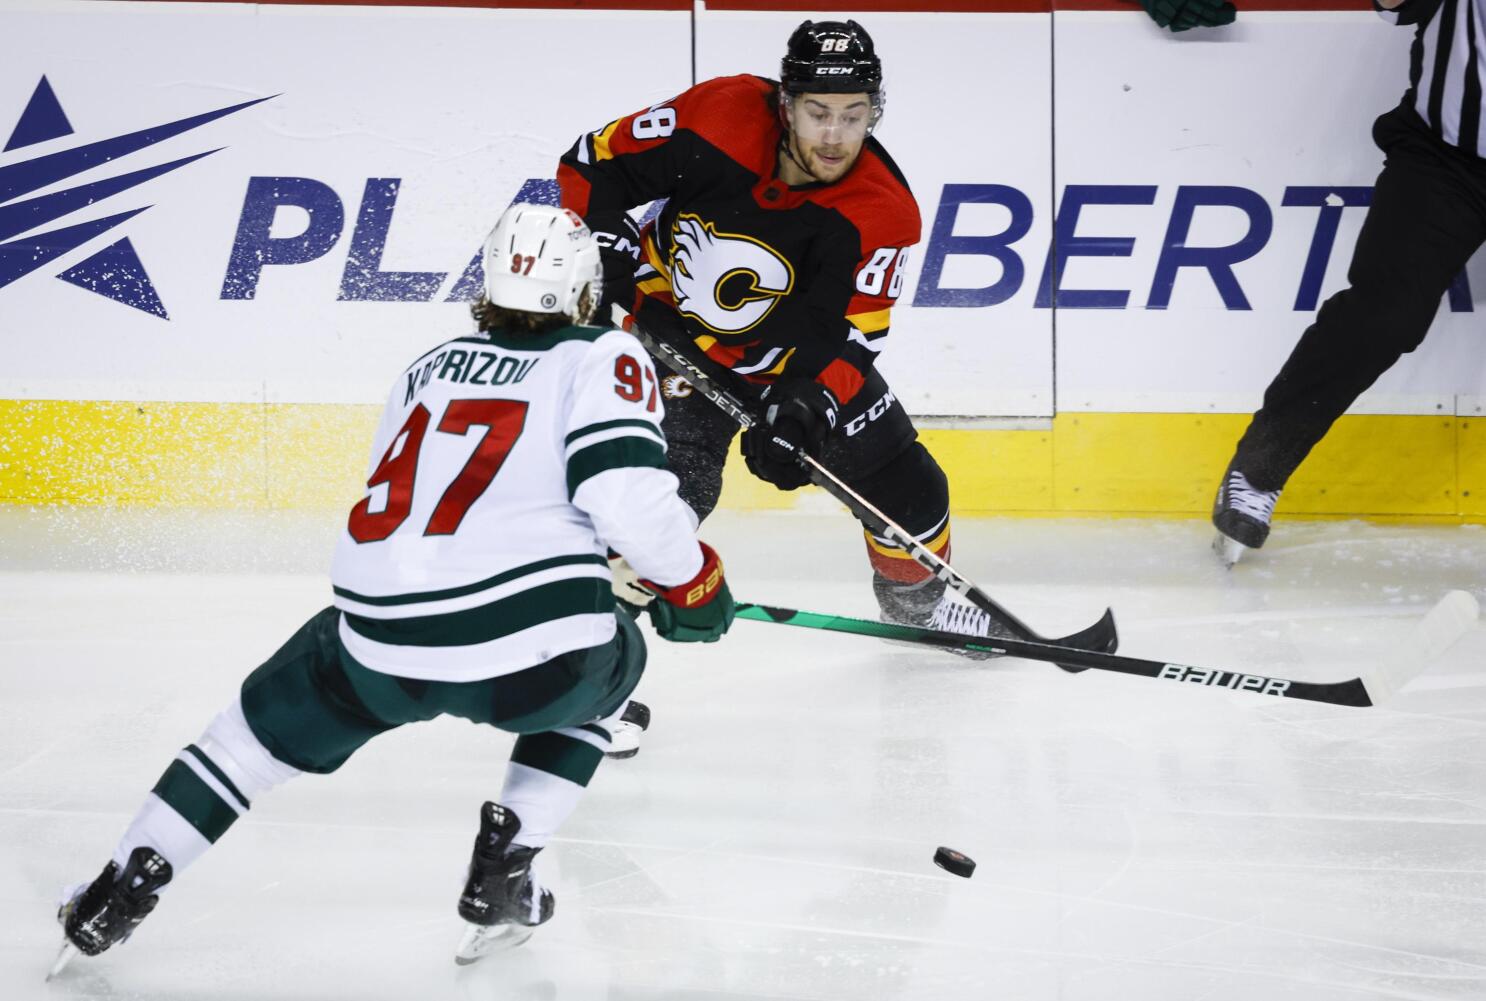 Mangiapane paces Flames to season-opening 5-3 win over Jets - The